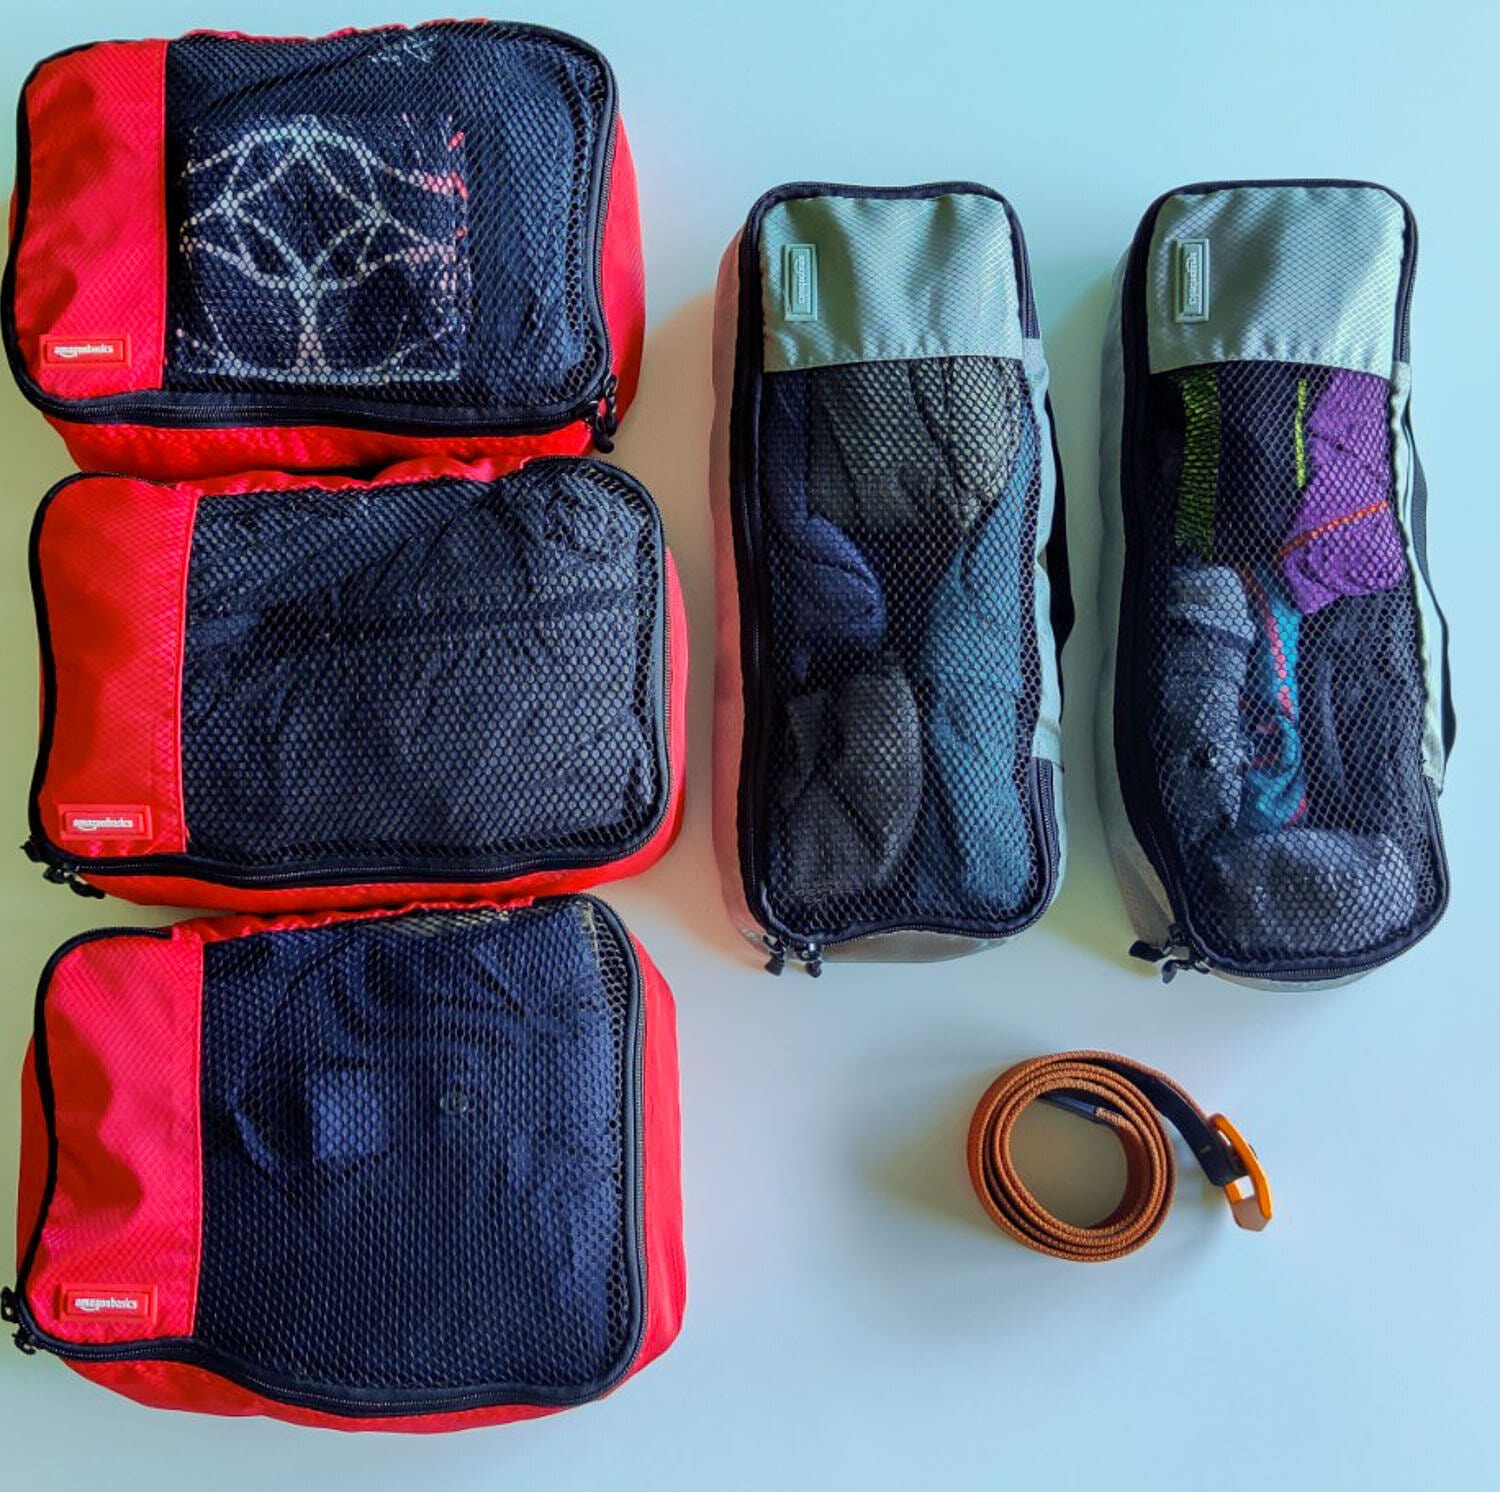 14 Travel Packing Tips Frequent Flyers Know